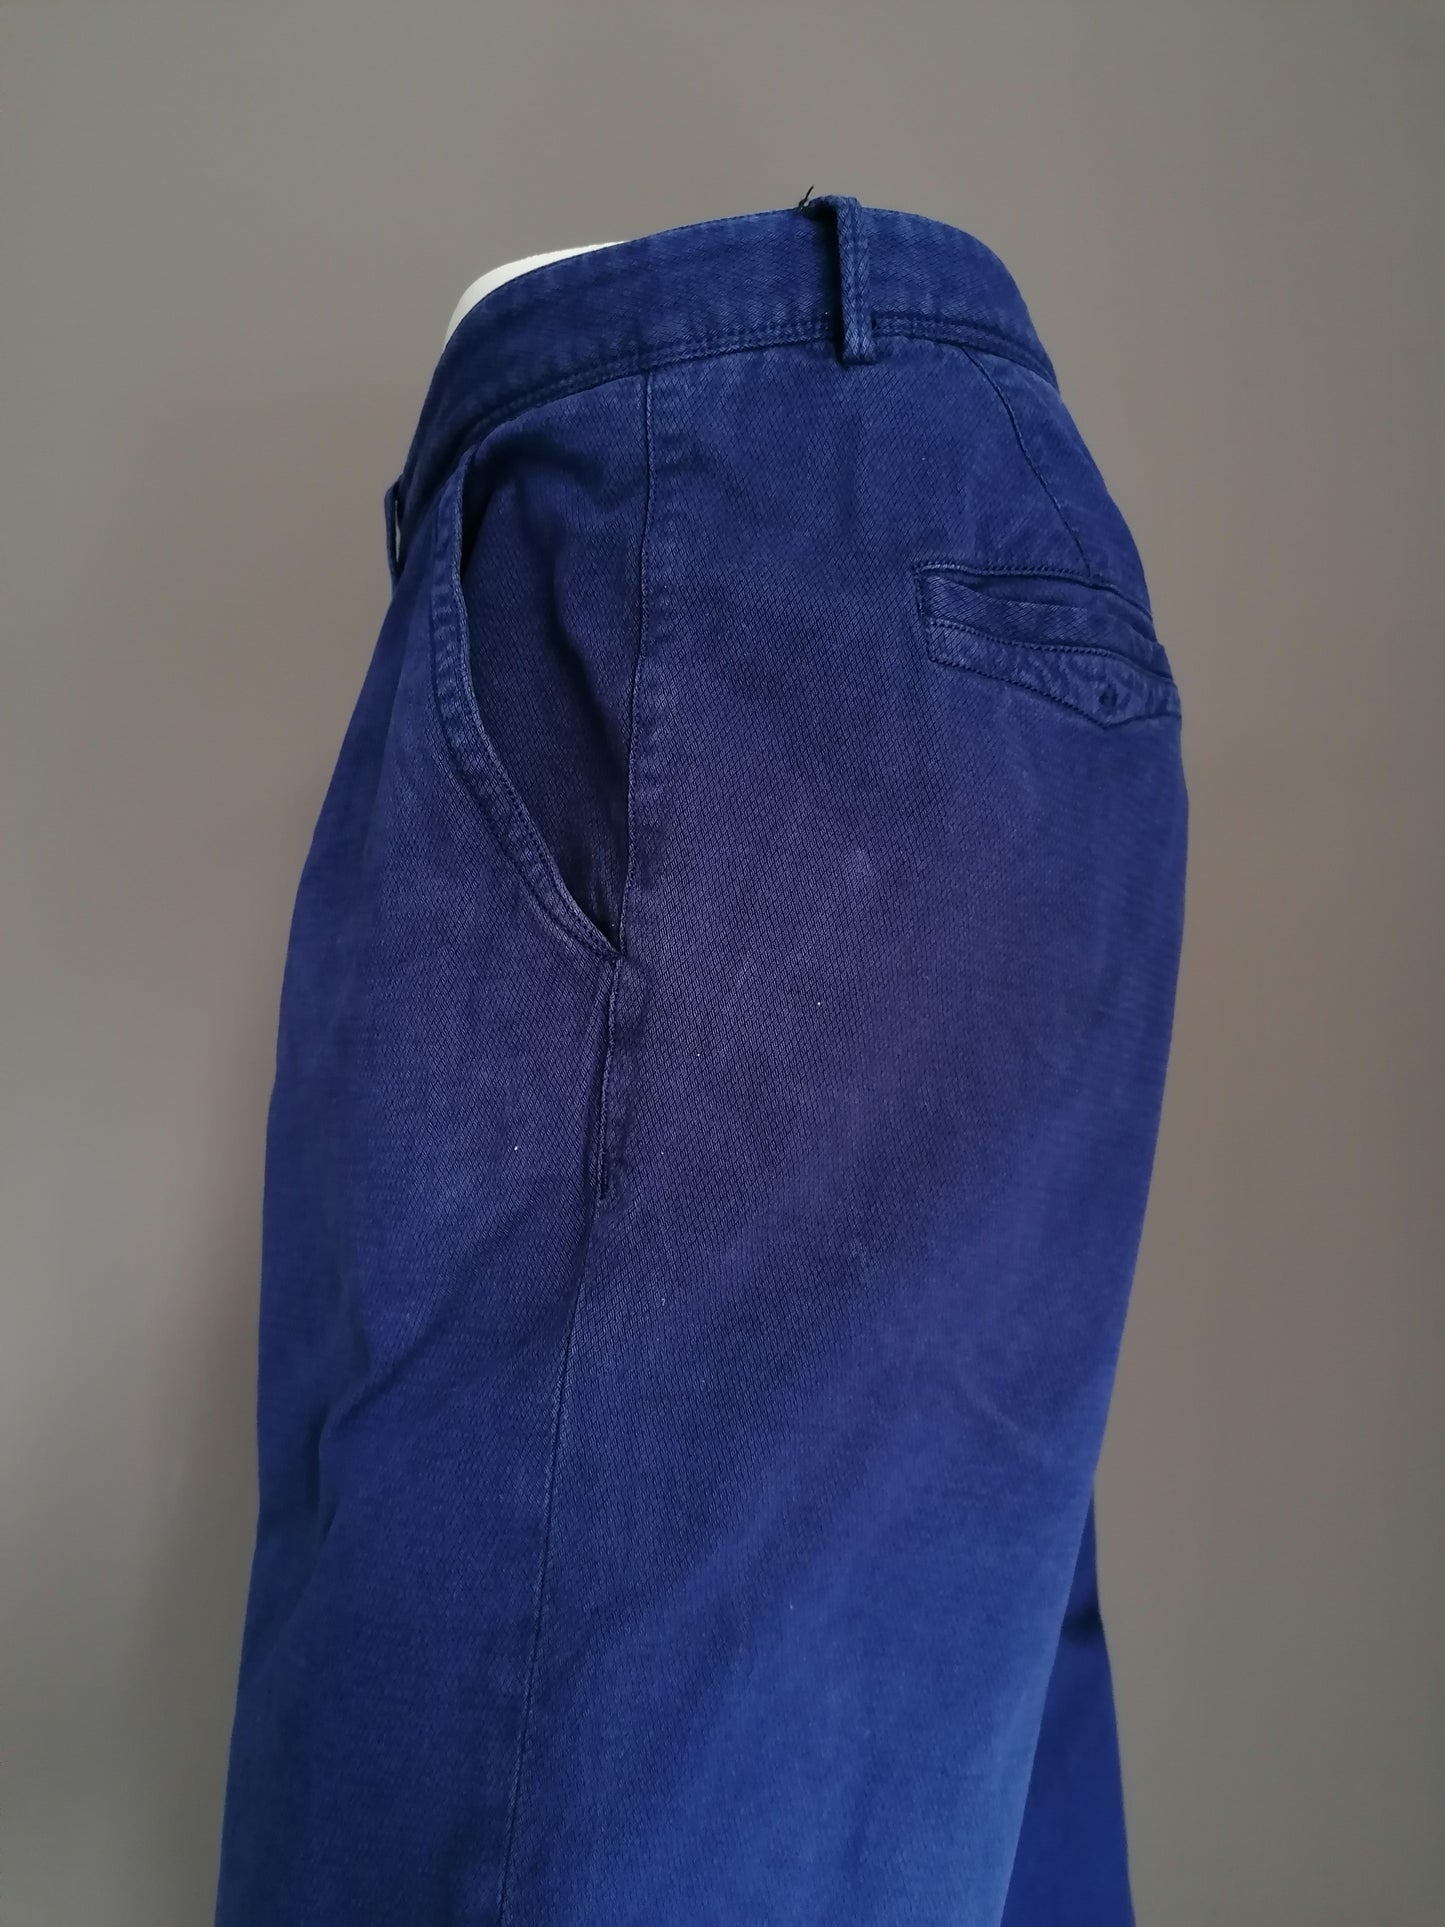 Massimo Dutti pants. Blaur colored. Size 48. Casual fit.